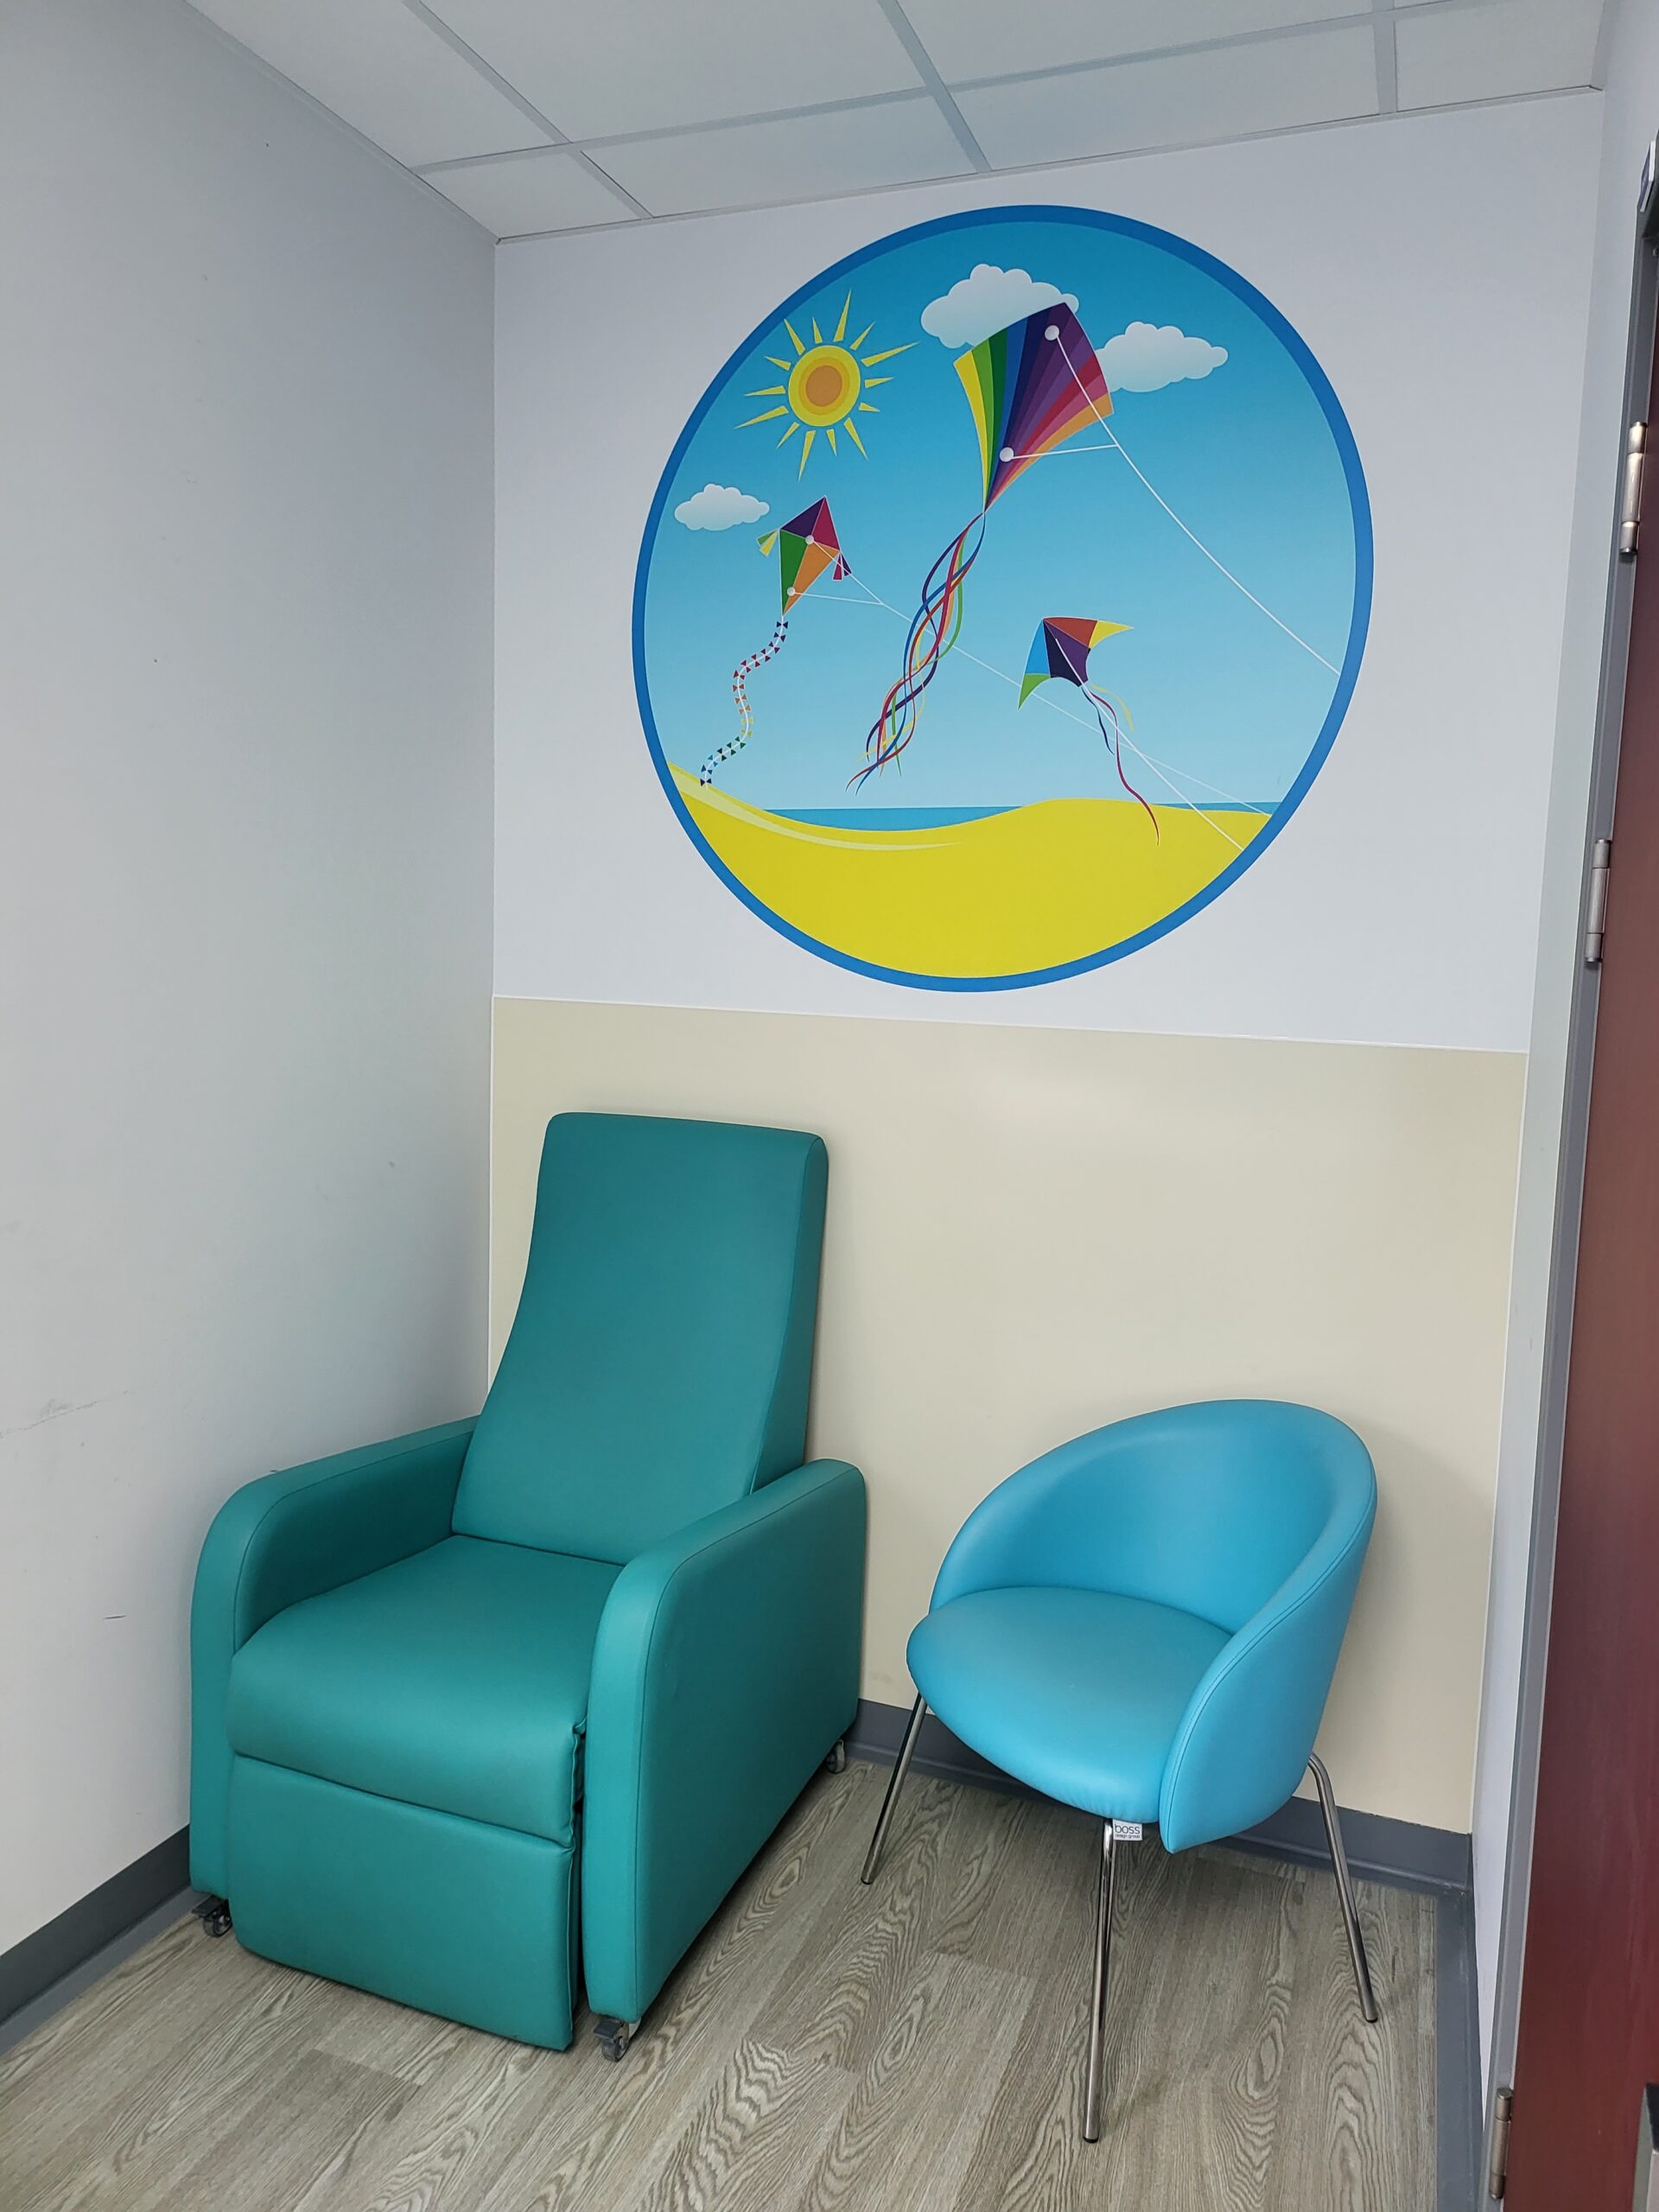 A room with a blue chair and a mural of kites.